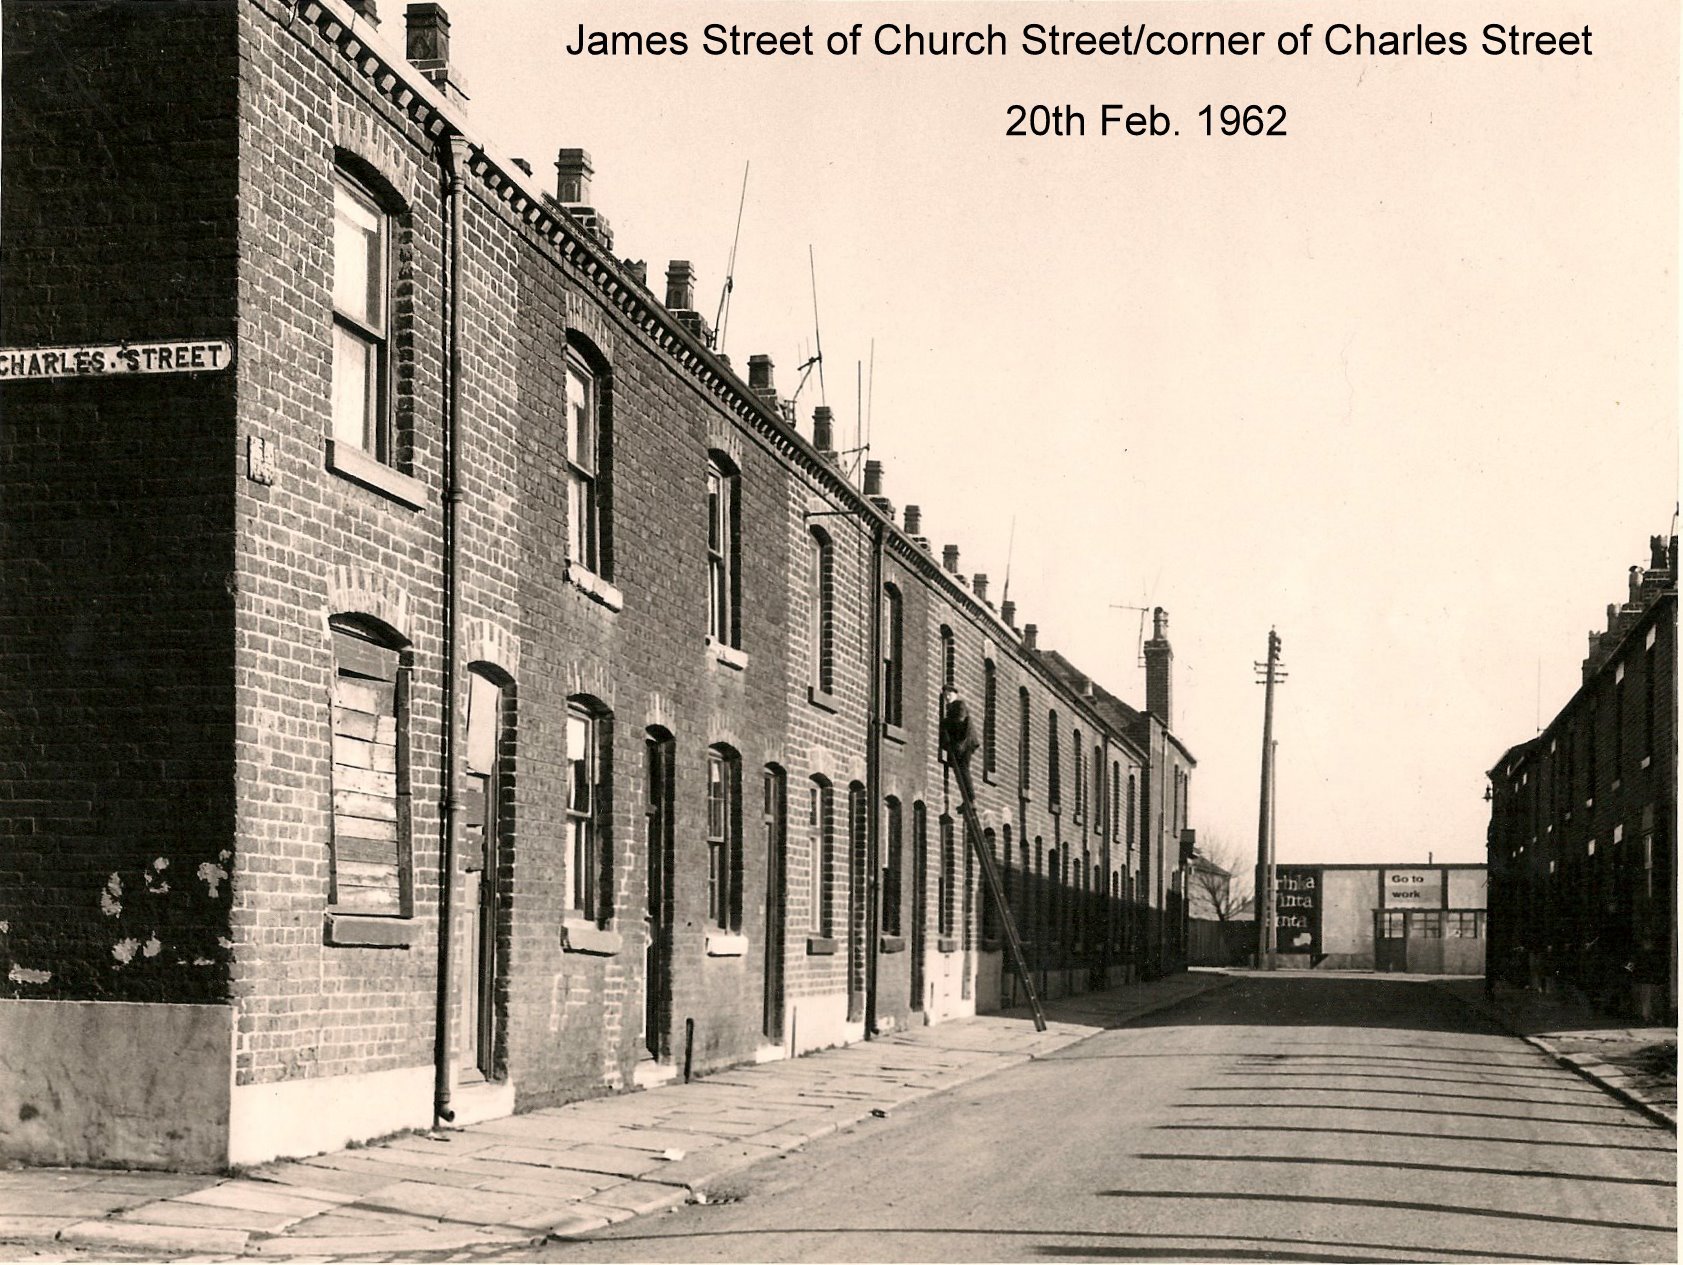 A photo of James Street